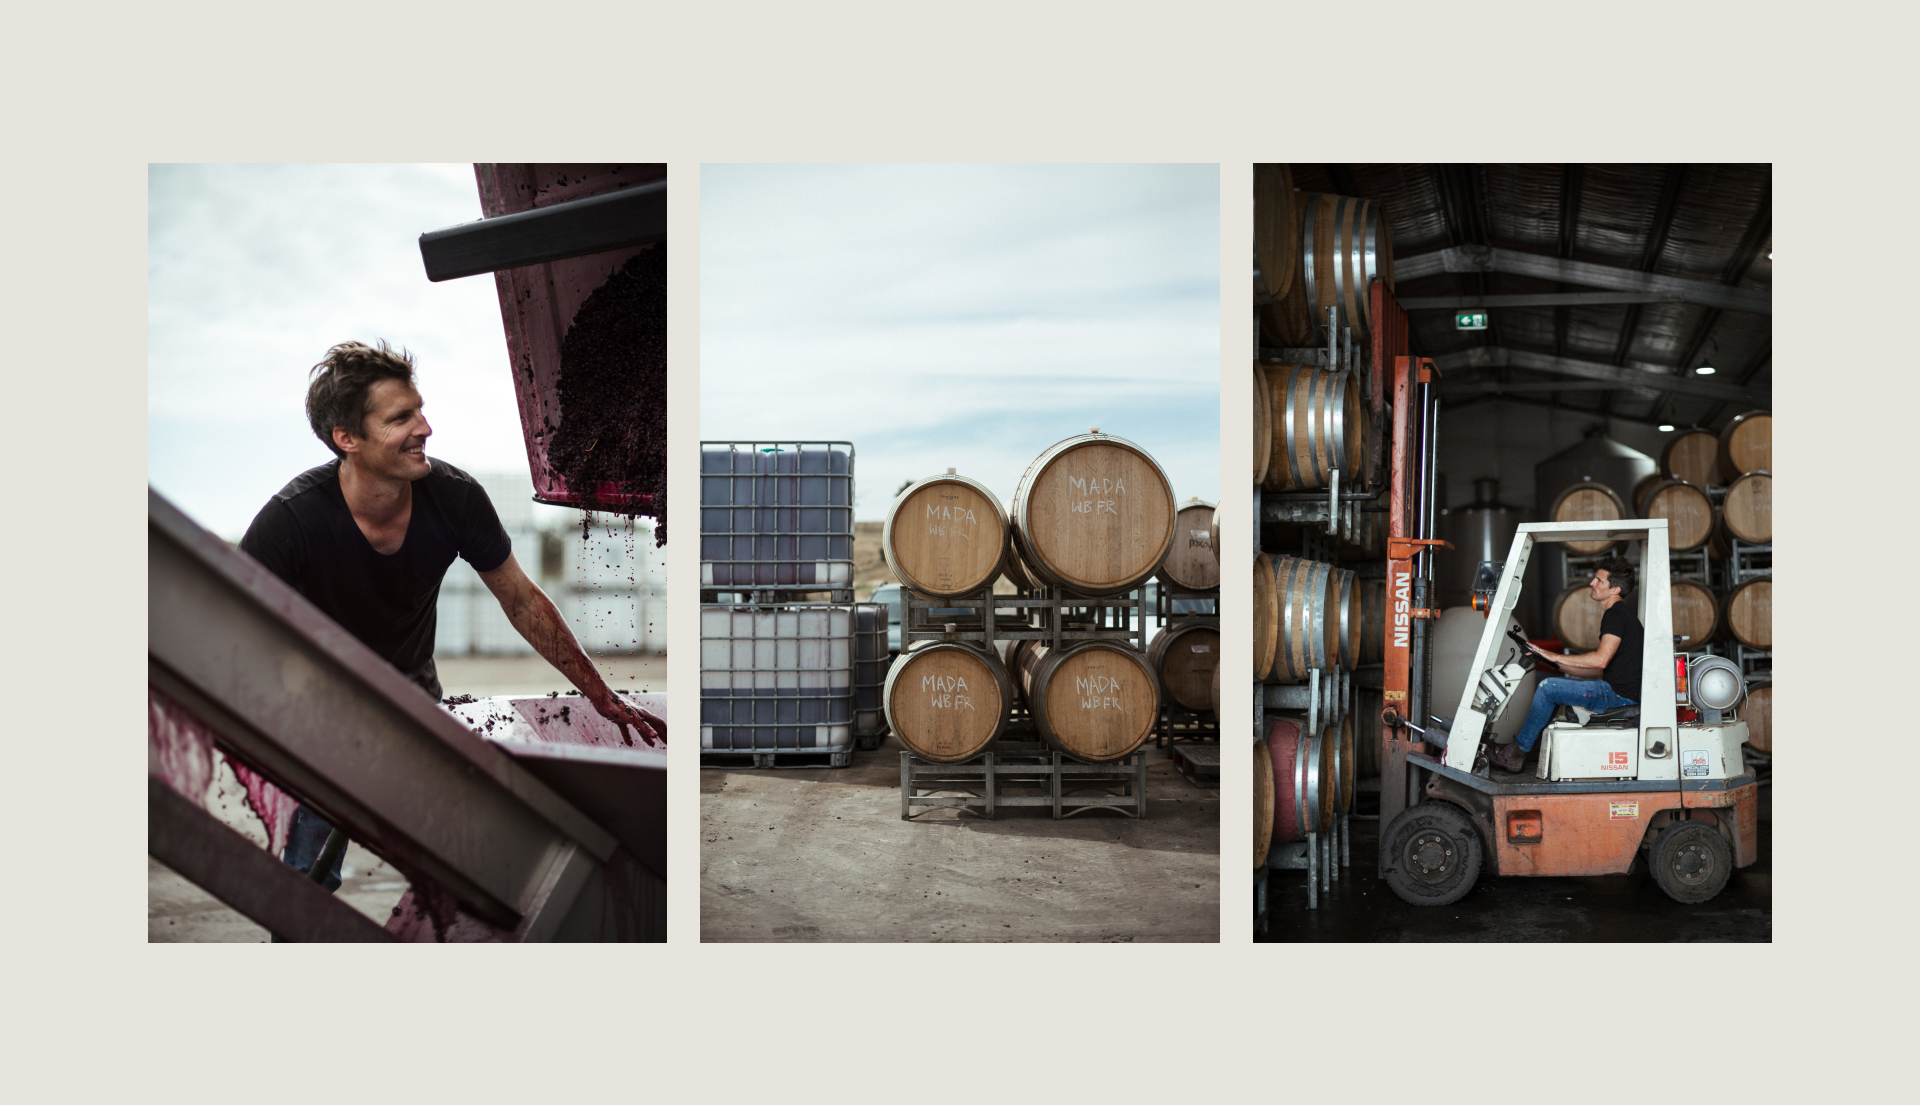 Three photographs on a beige background. Image one is winemaker with red wine covered arms pouring grapes from large crate into large funnel. Image two is wine barrels stacked. Image three is winemaker driving forklift moving wine barrels.